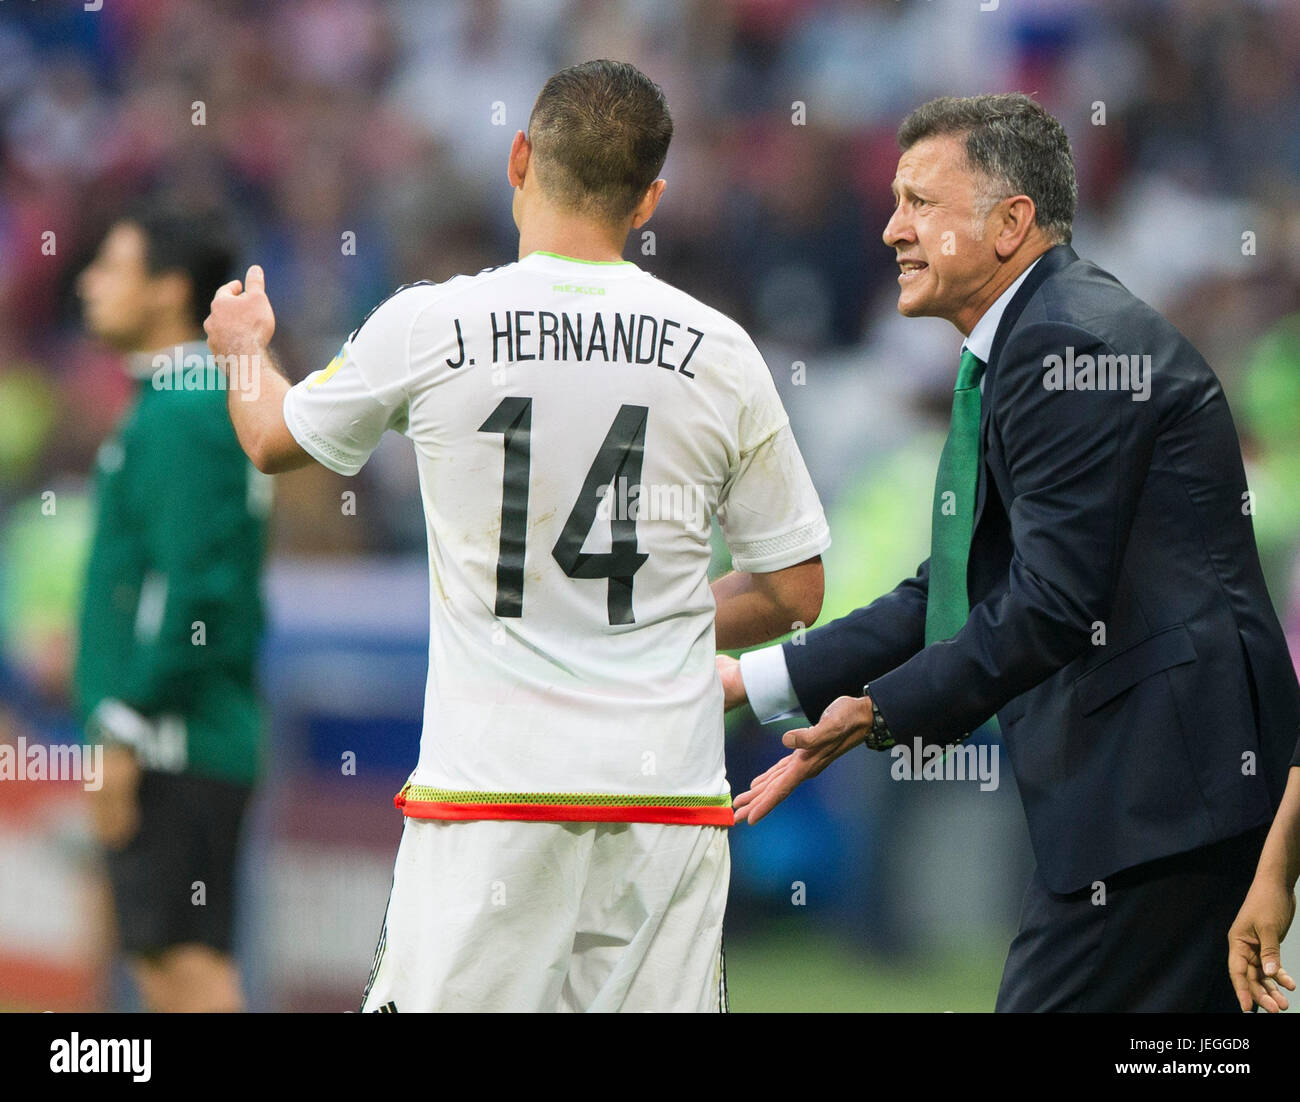 Kazan, Russia. 24th June, 2017. Juan Carlos Osorio (R), head coach of Mexico, gives instructions to player Javier Hernandez during group A match between Russia and Mexico at the 2017 FIFA Confederations Cup in Kazan, Russia, on June 24, 2017. Mexico won 2-1. Credit: Bai Xueqi/Xinhua/Alamy Live News Stock Photo